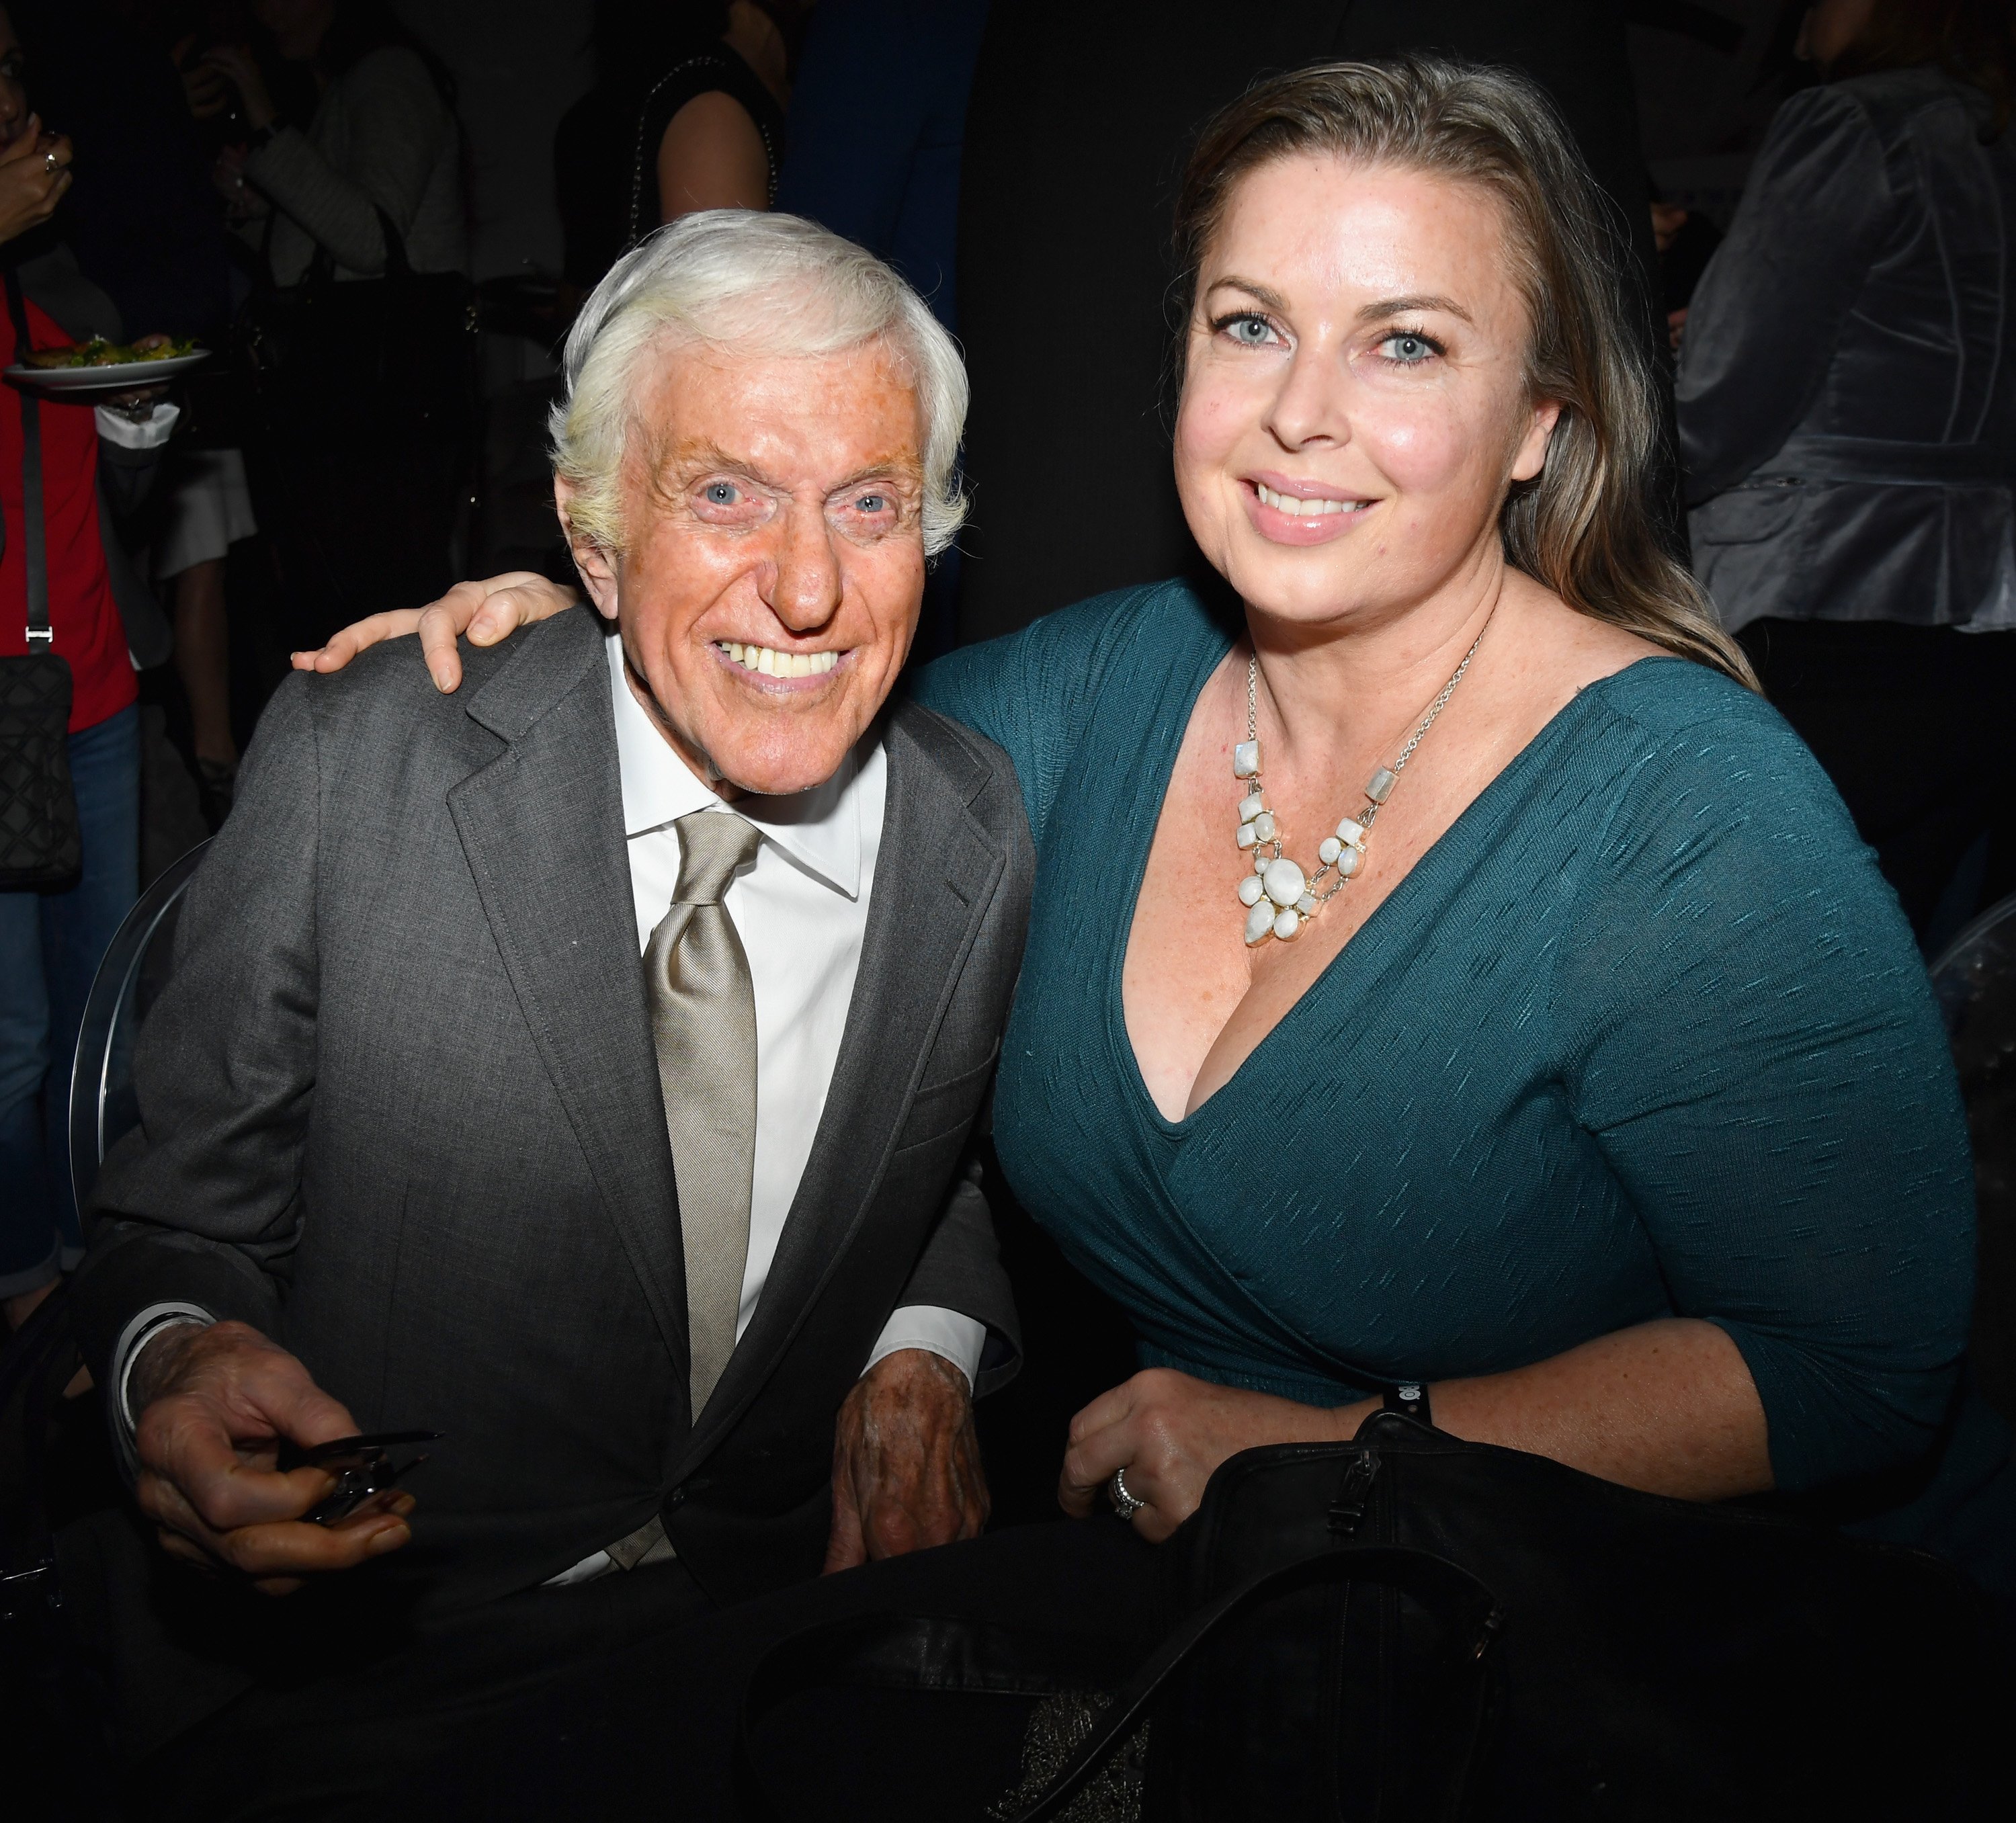 Dick Van Dyke and Arlene Silver at the LA Premiere of "If You're Not In The Obit, Eat Breakfast" from HBO Documentaries on May 17, 2017, in Beverly Hills, California. | Source: Getty Images